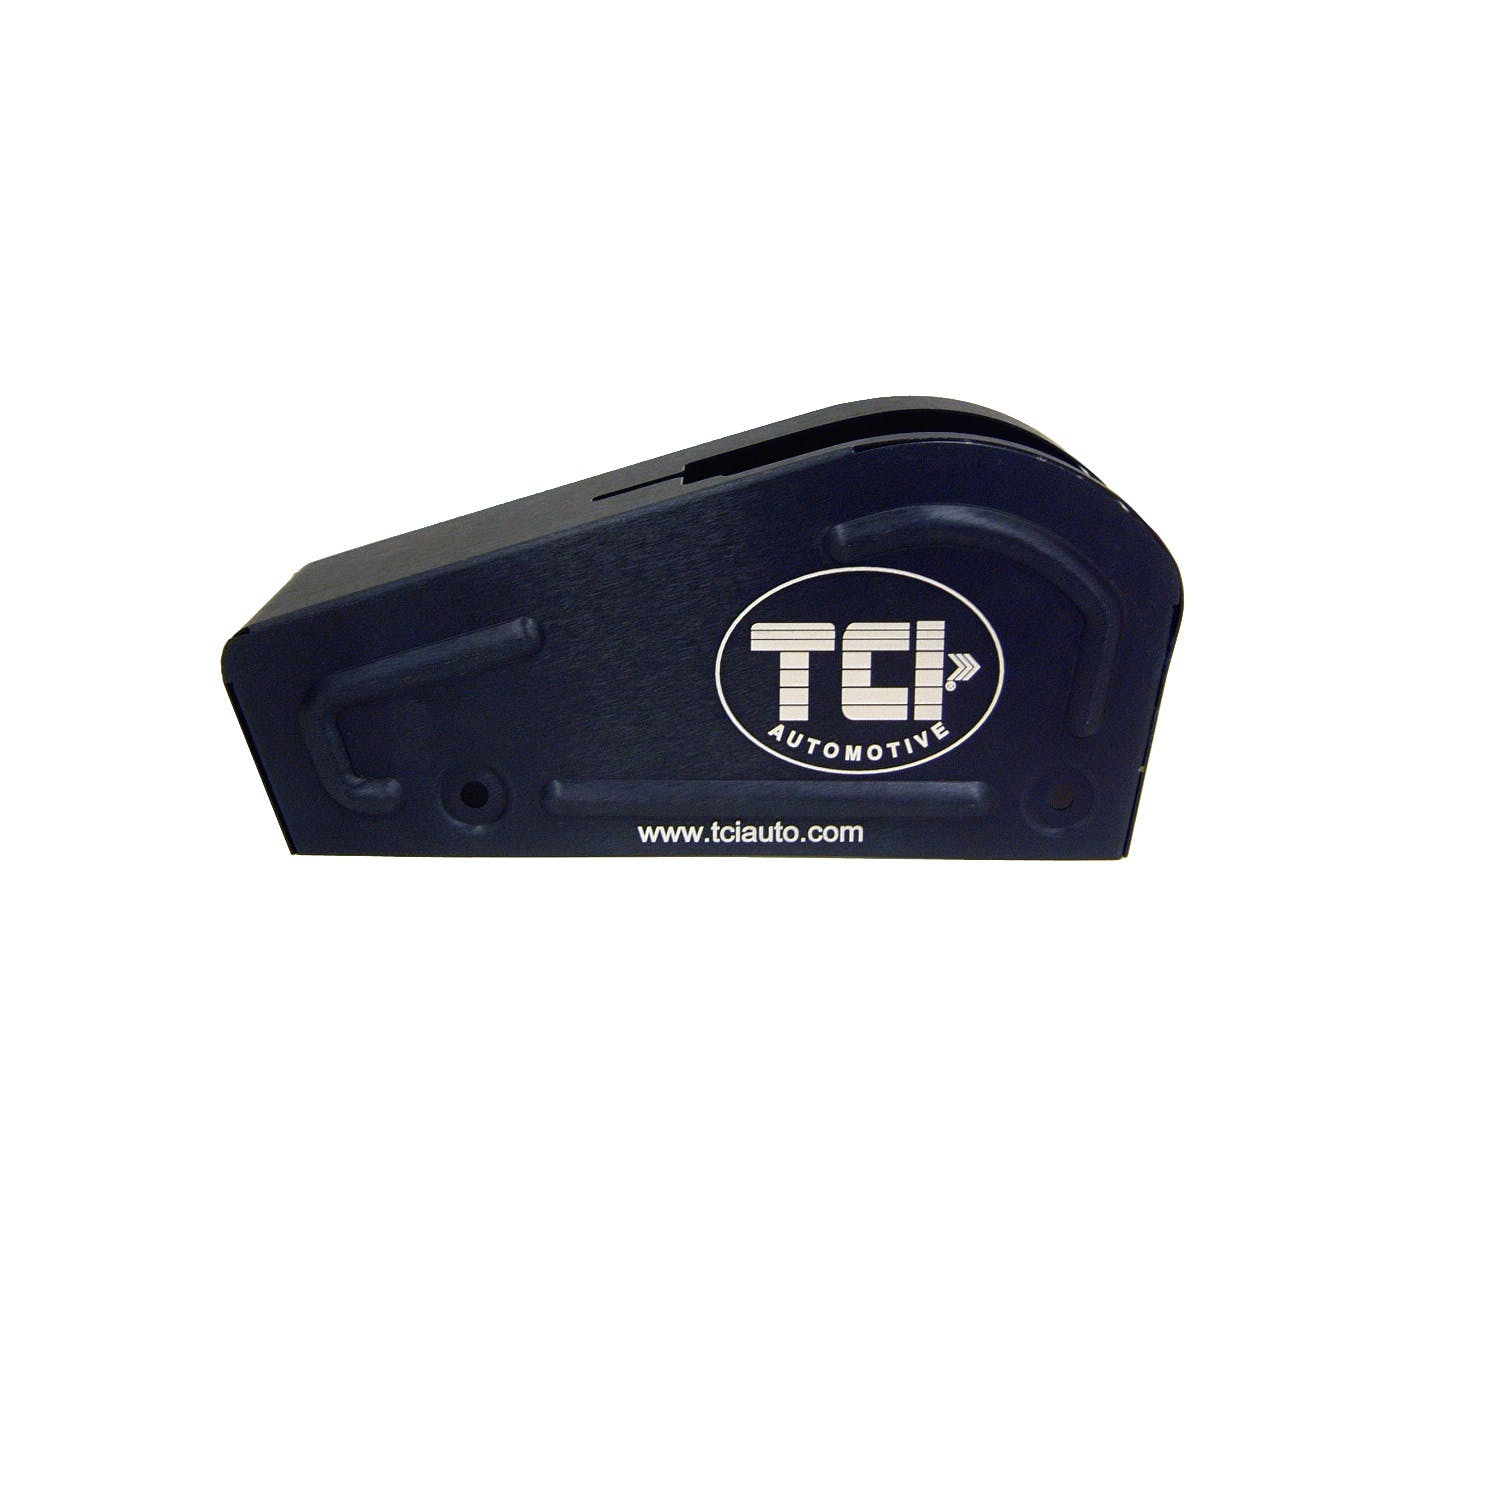 TCI Automotive 618002 Aluminum Cover for Outlaw Shifter